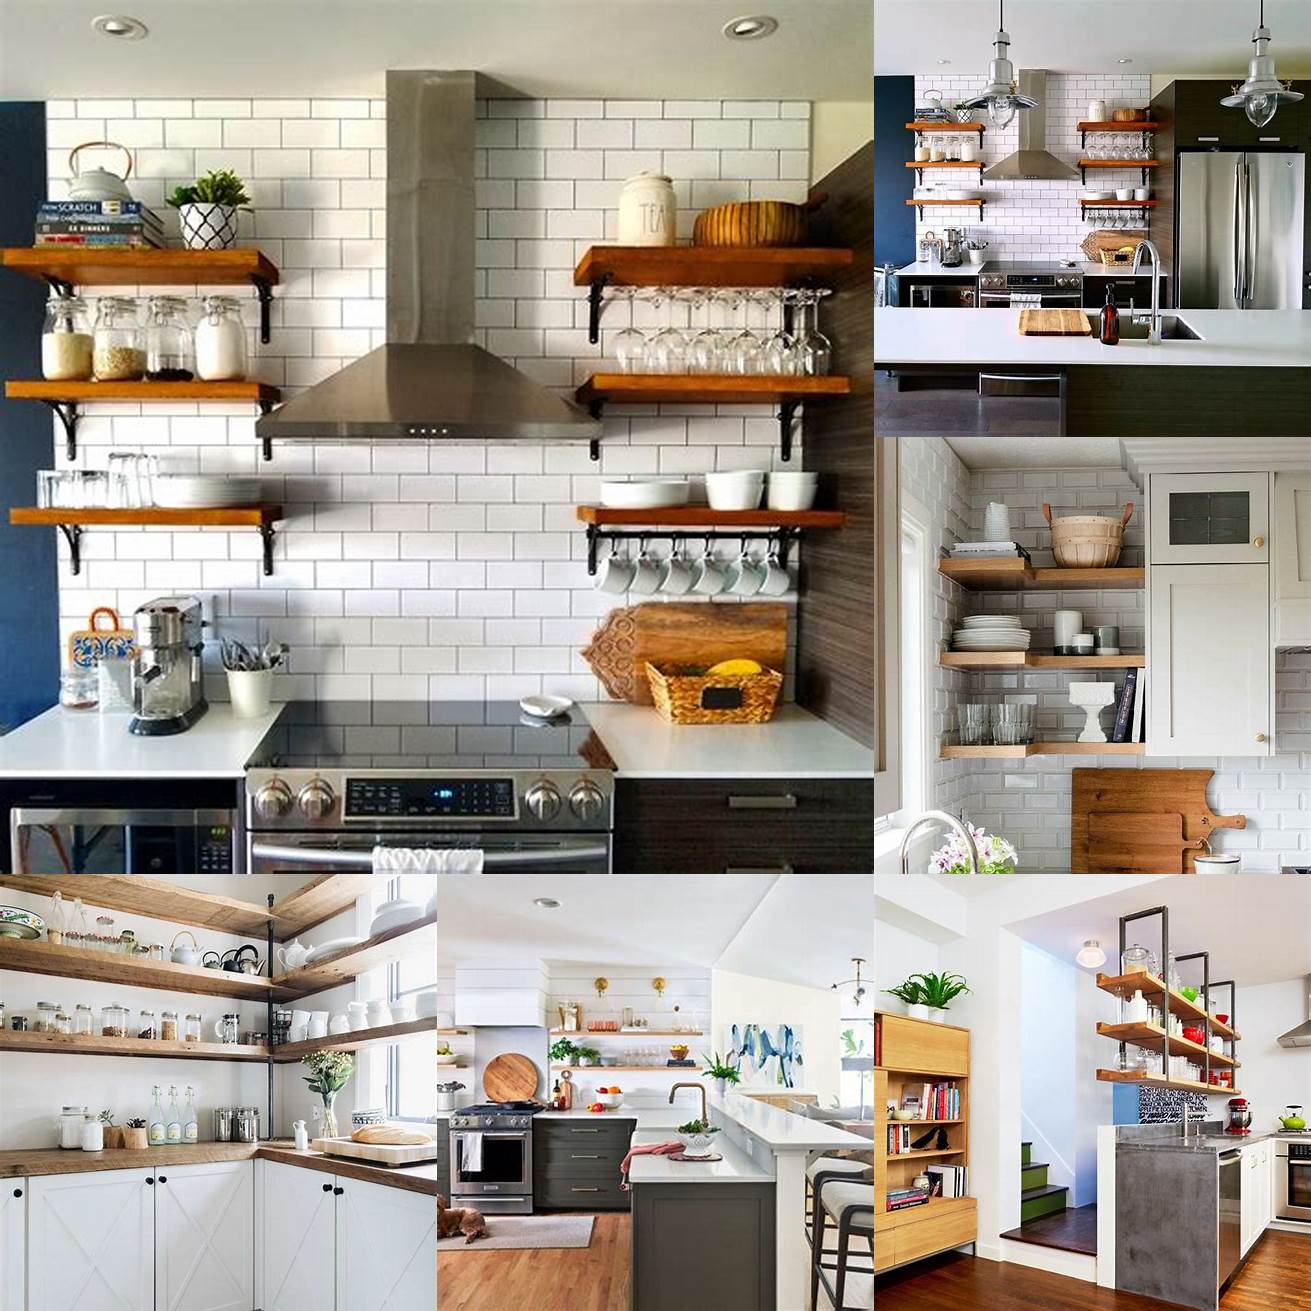 1 Kitchen with Open Shelving